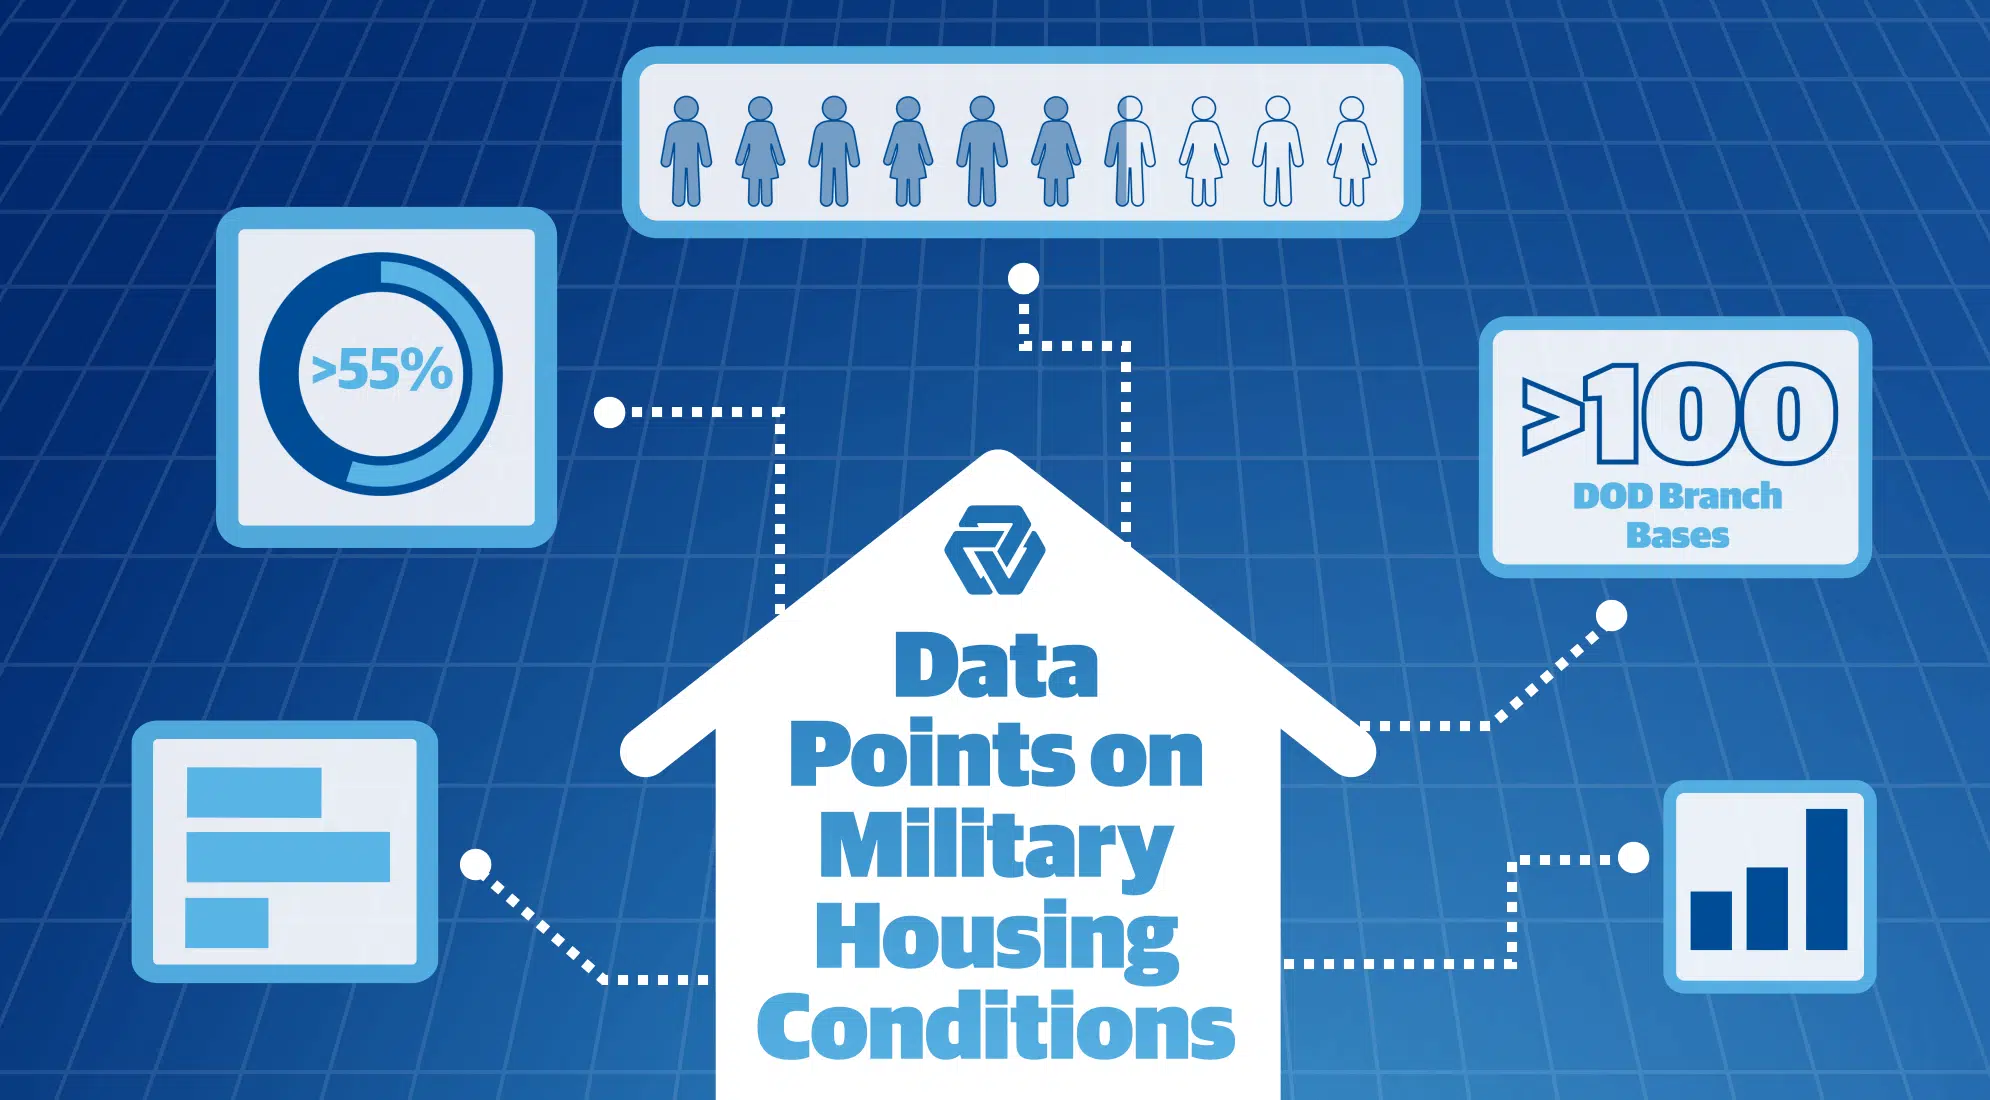 7 Data Points on Military Housing Conditions 2